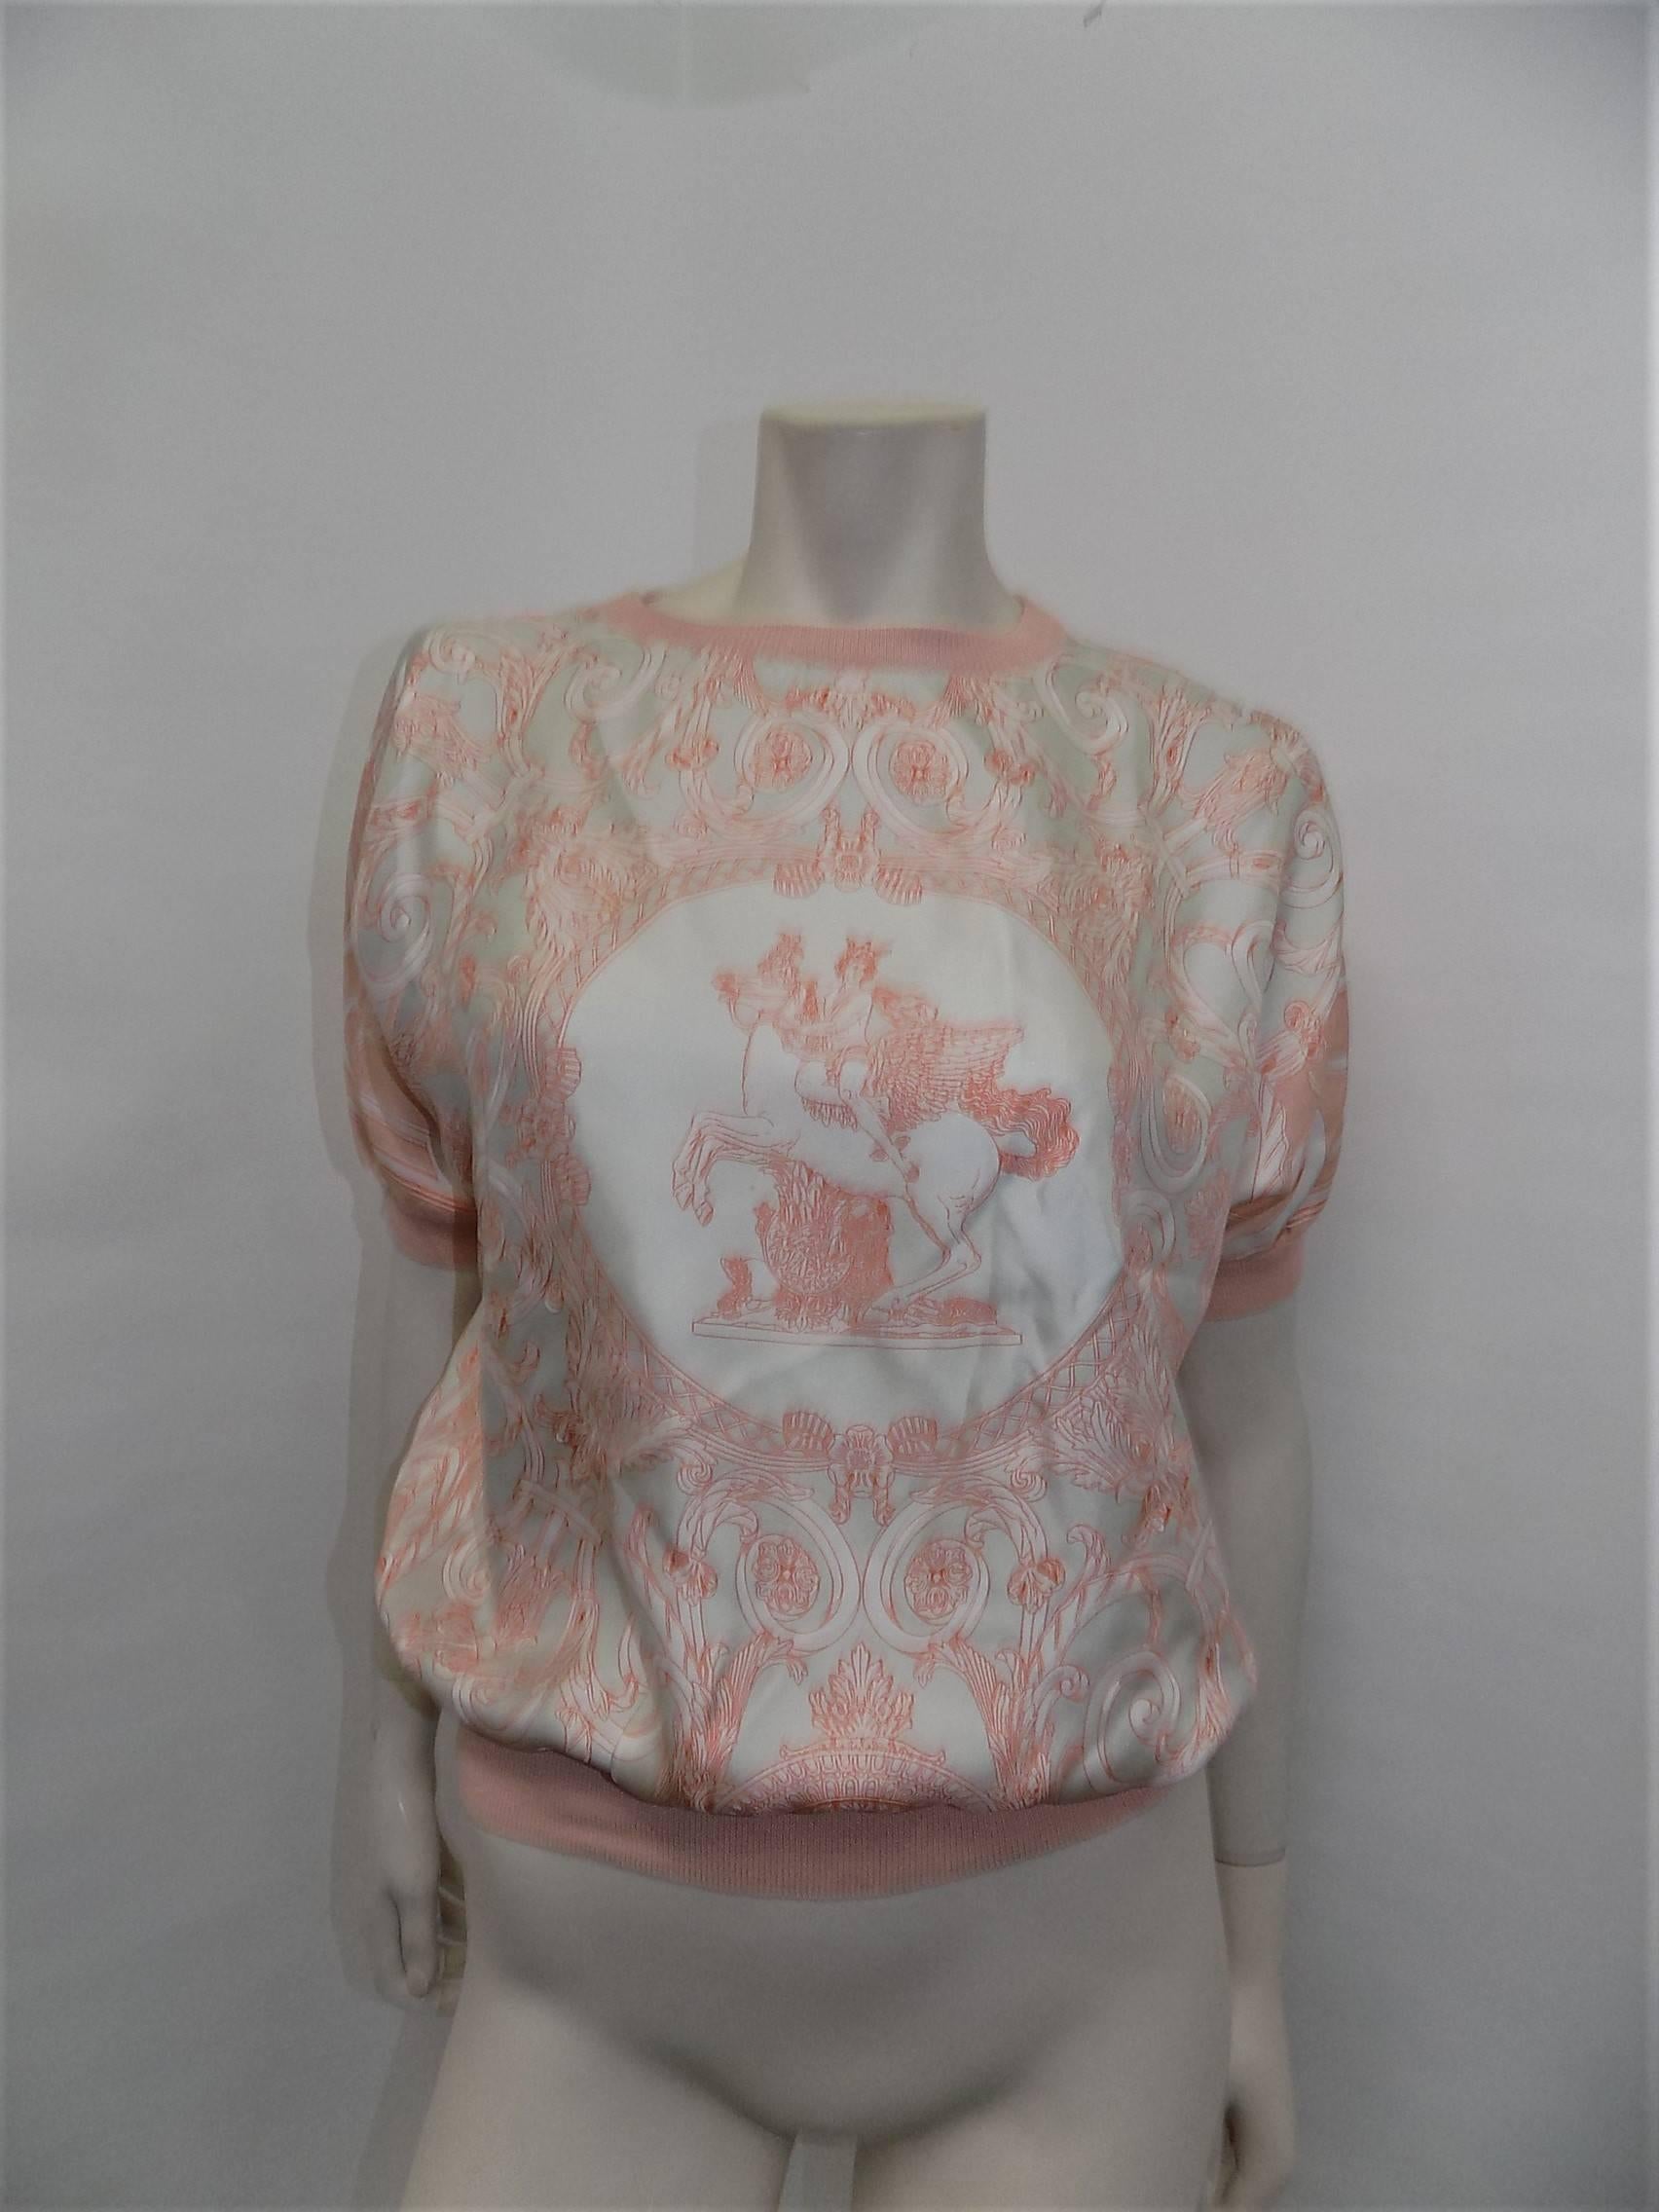 Spectacular and never worn pale peach blouse and cardigan set. Crew collared top with short sleeves and knit trim. Cardigan has double cuffs, gold toned buttons with Hermes Paris engraved details. Made in Italy. Top: 100% silk. Cardigan: 65%